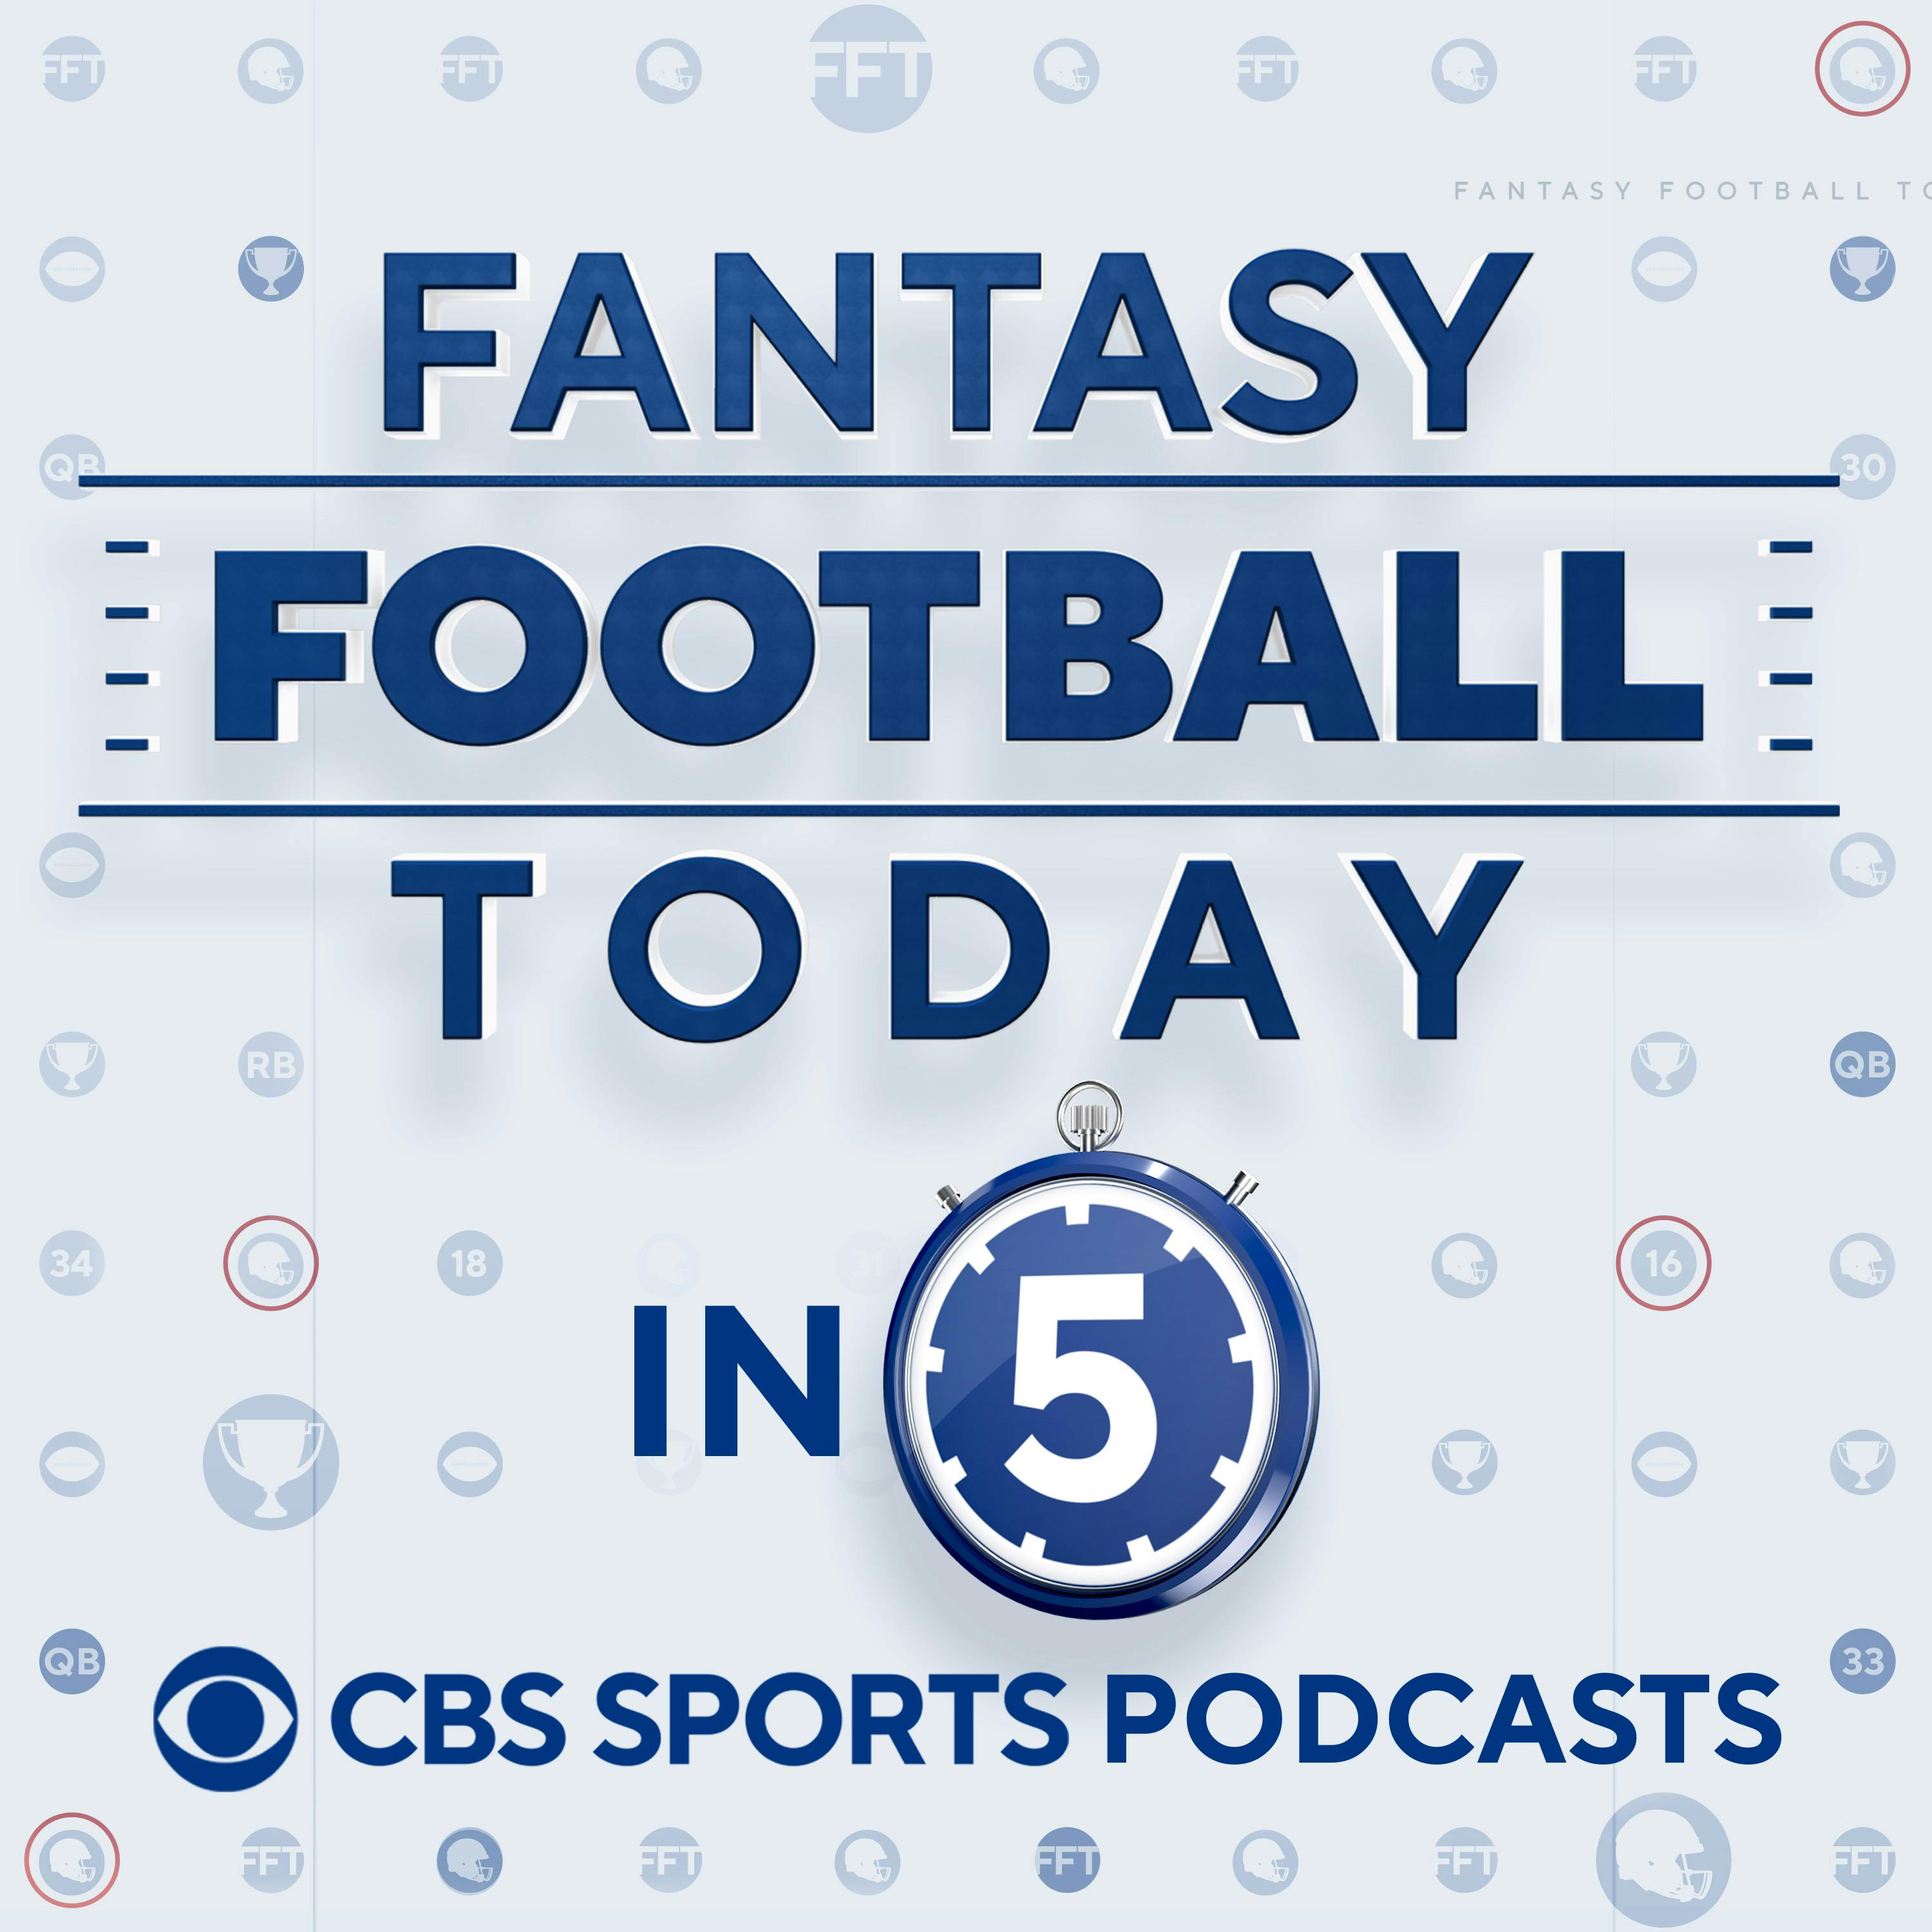 FFT in 5 - The Next Great WRs? Projecting Harrison Jr, Odunze, and Nabers (04/18 Fantasy Football Podcast)